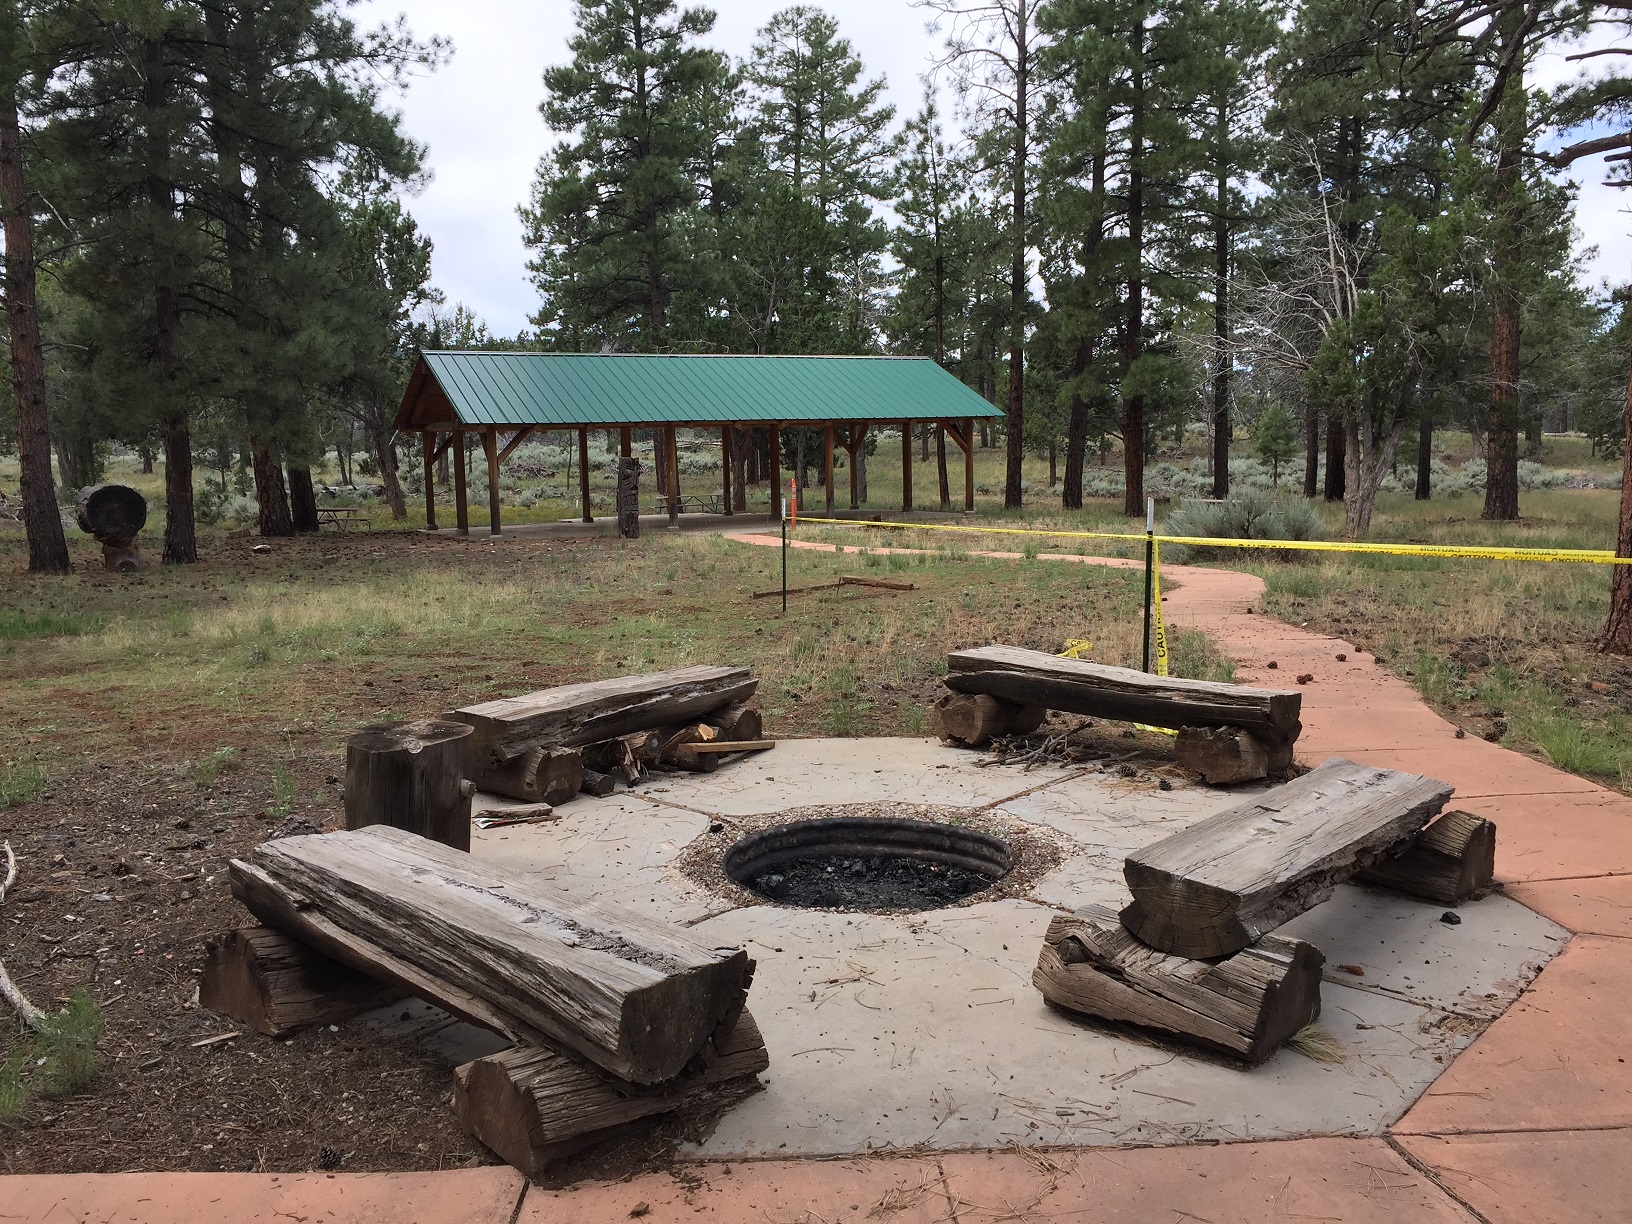 Firepit and pavilion at the BLM Administrative Site on the Arizona Strip